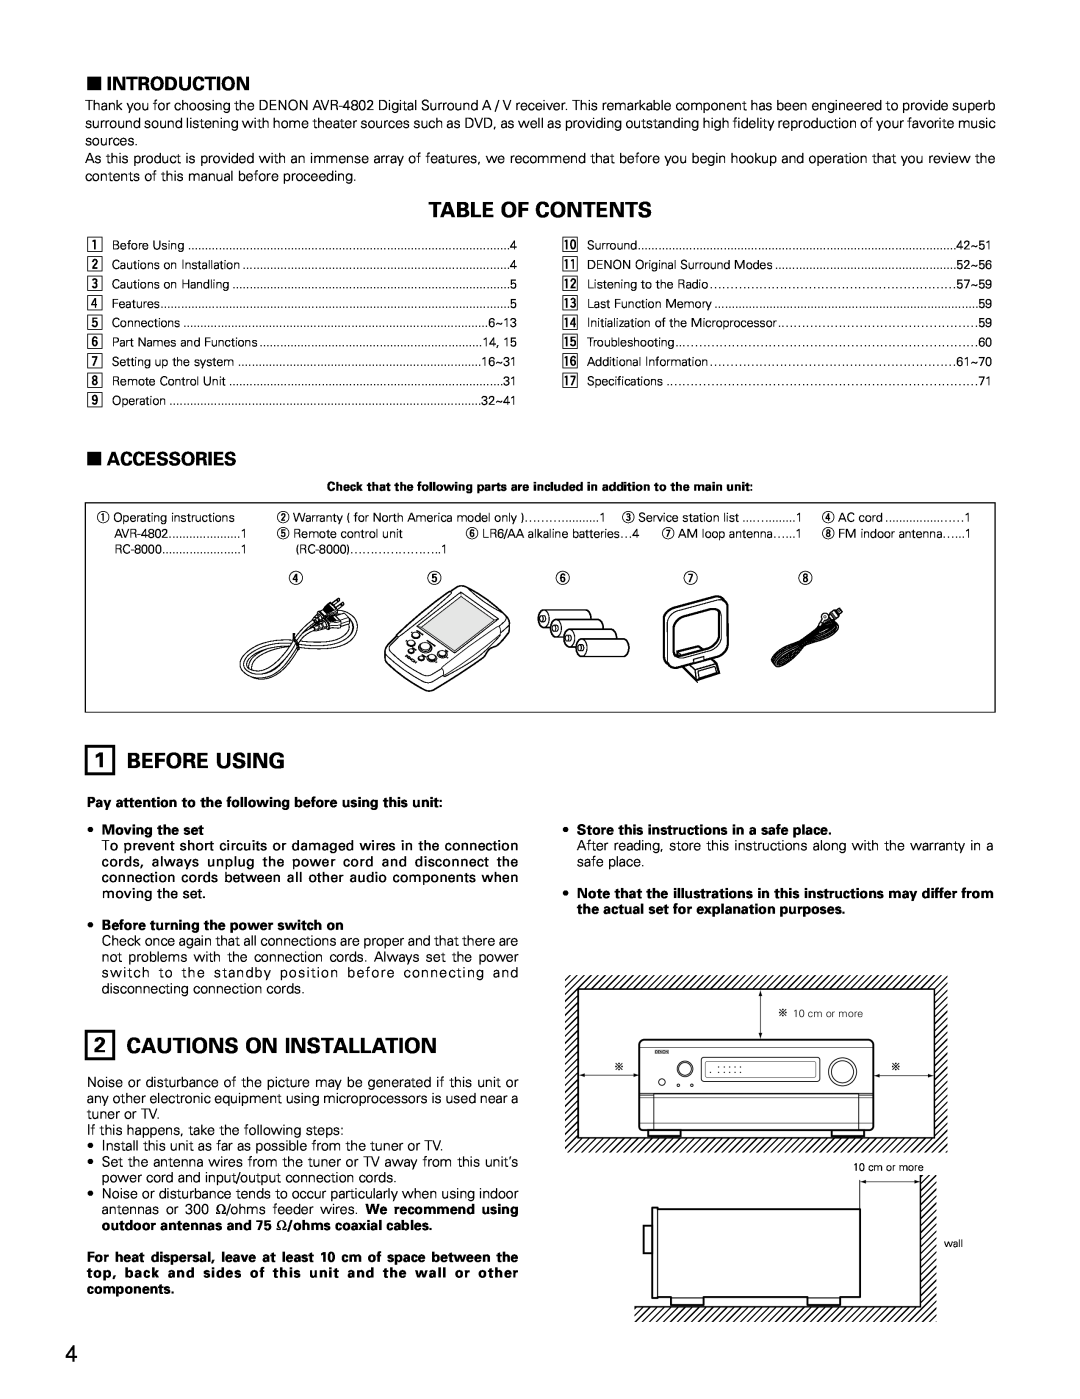 Denon AVR-4802 Table Of Contents, Before Using, Cautions On Installation, 2INTRODUCTION, 2ACCESSORIES, •Moving the set 